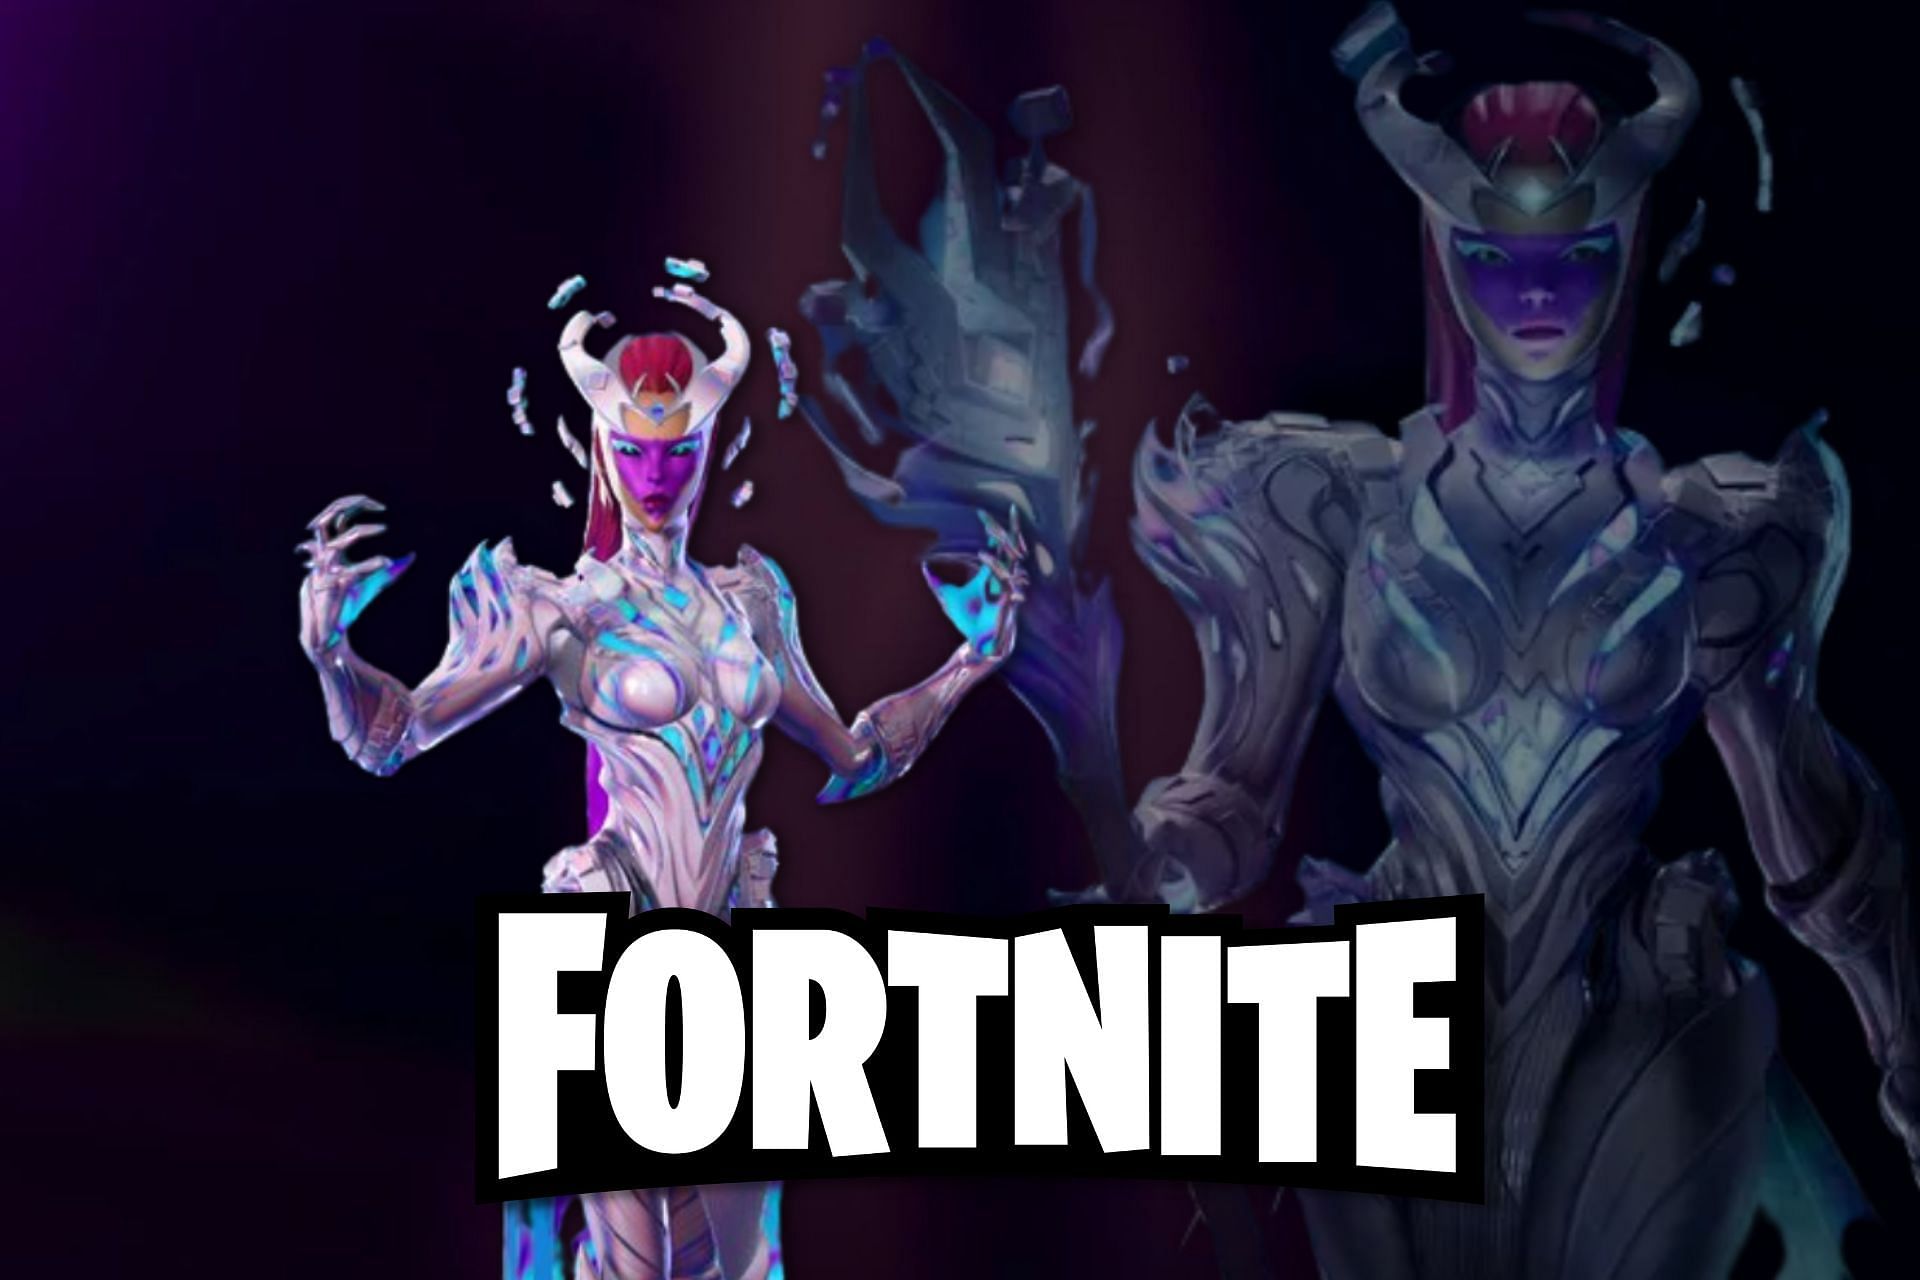 The Cube Queen has revealed herself above the new Cube Town POI but she is yet to interact with Fortnite players in Season 8 (Image via Sportskeeda)